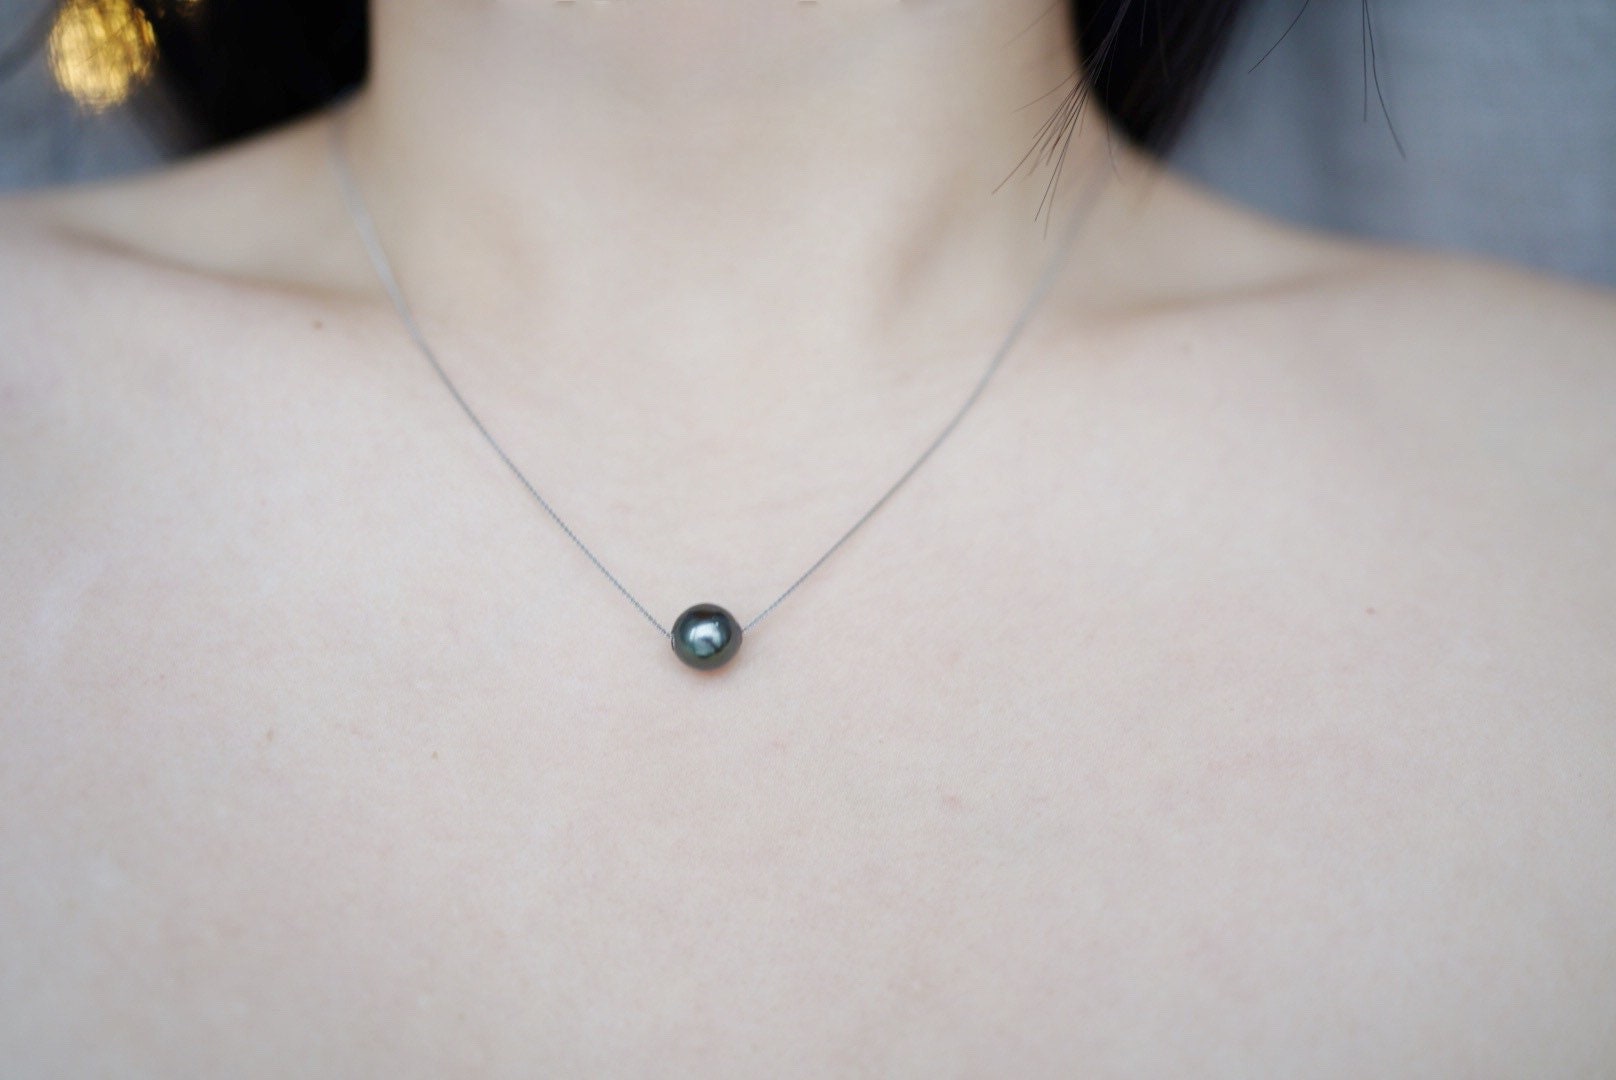 Tahitian pearl - Black Tahitian Calypso Necklace on lady's neck